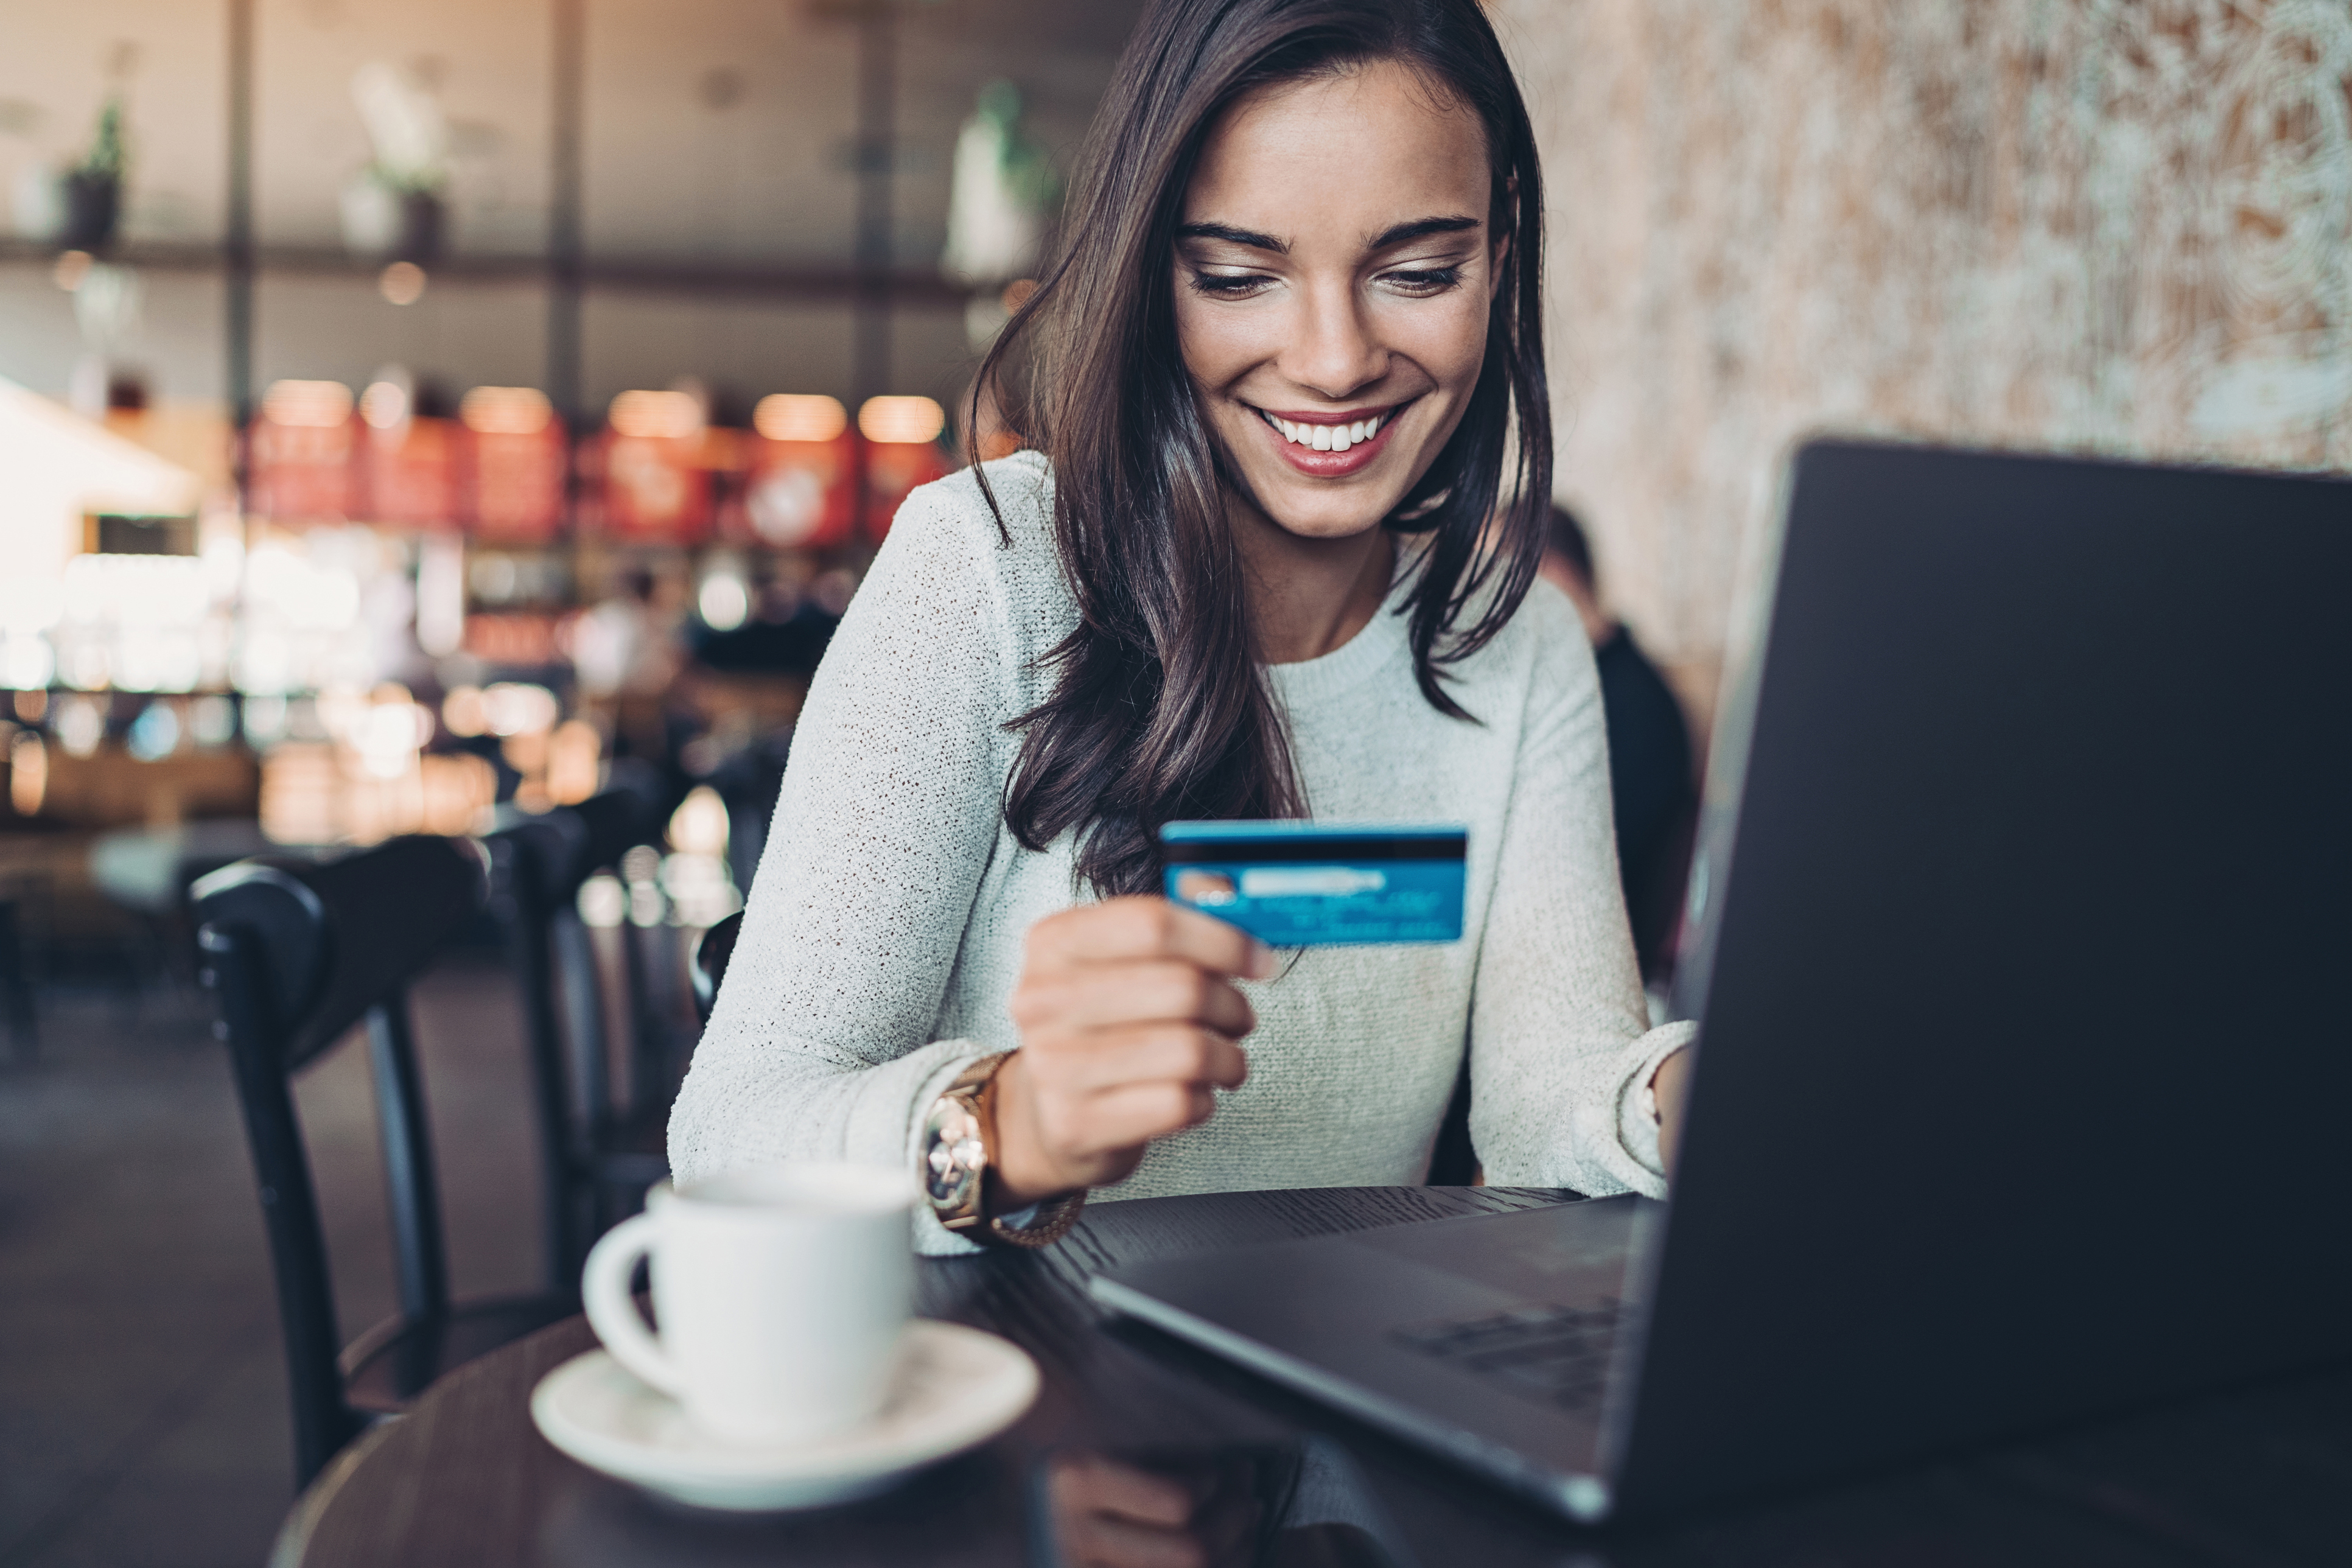 Smiling businesswoman holding a credit card and using laptop in a restaurant